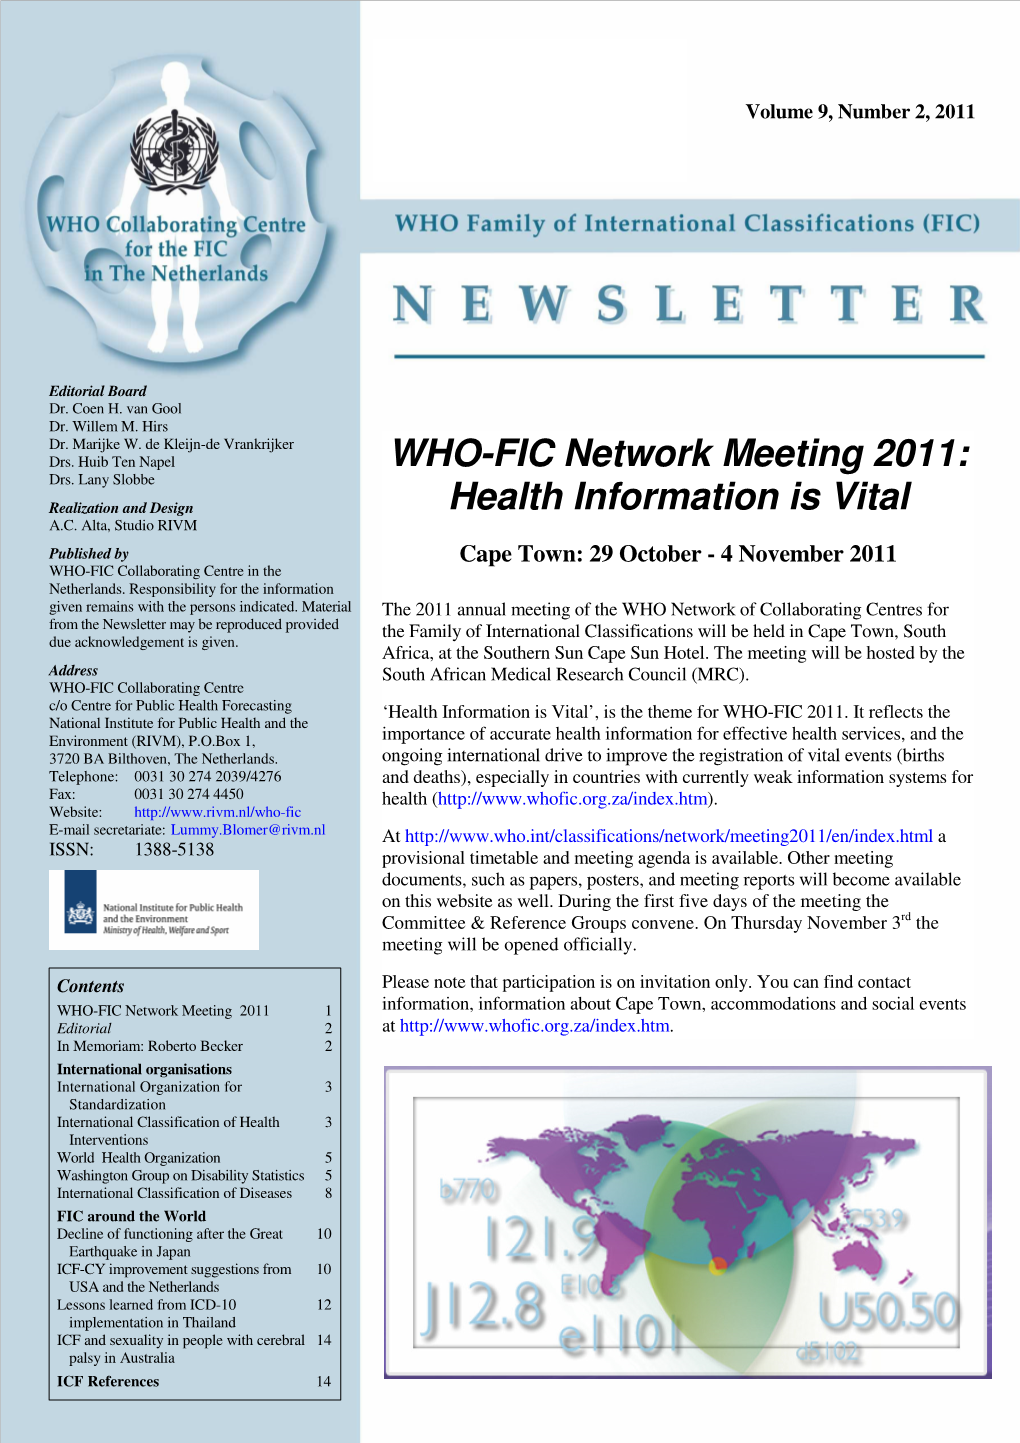 WHO-FIC Network Meeting 2011: Drs